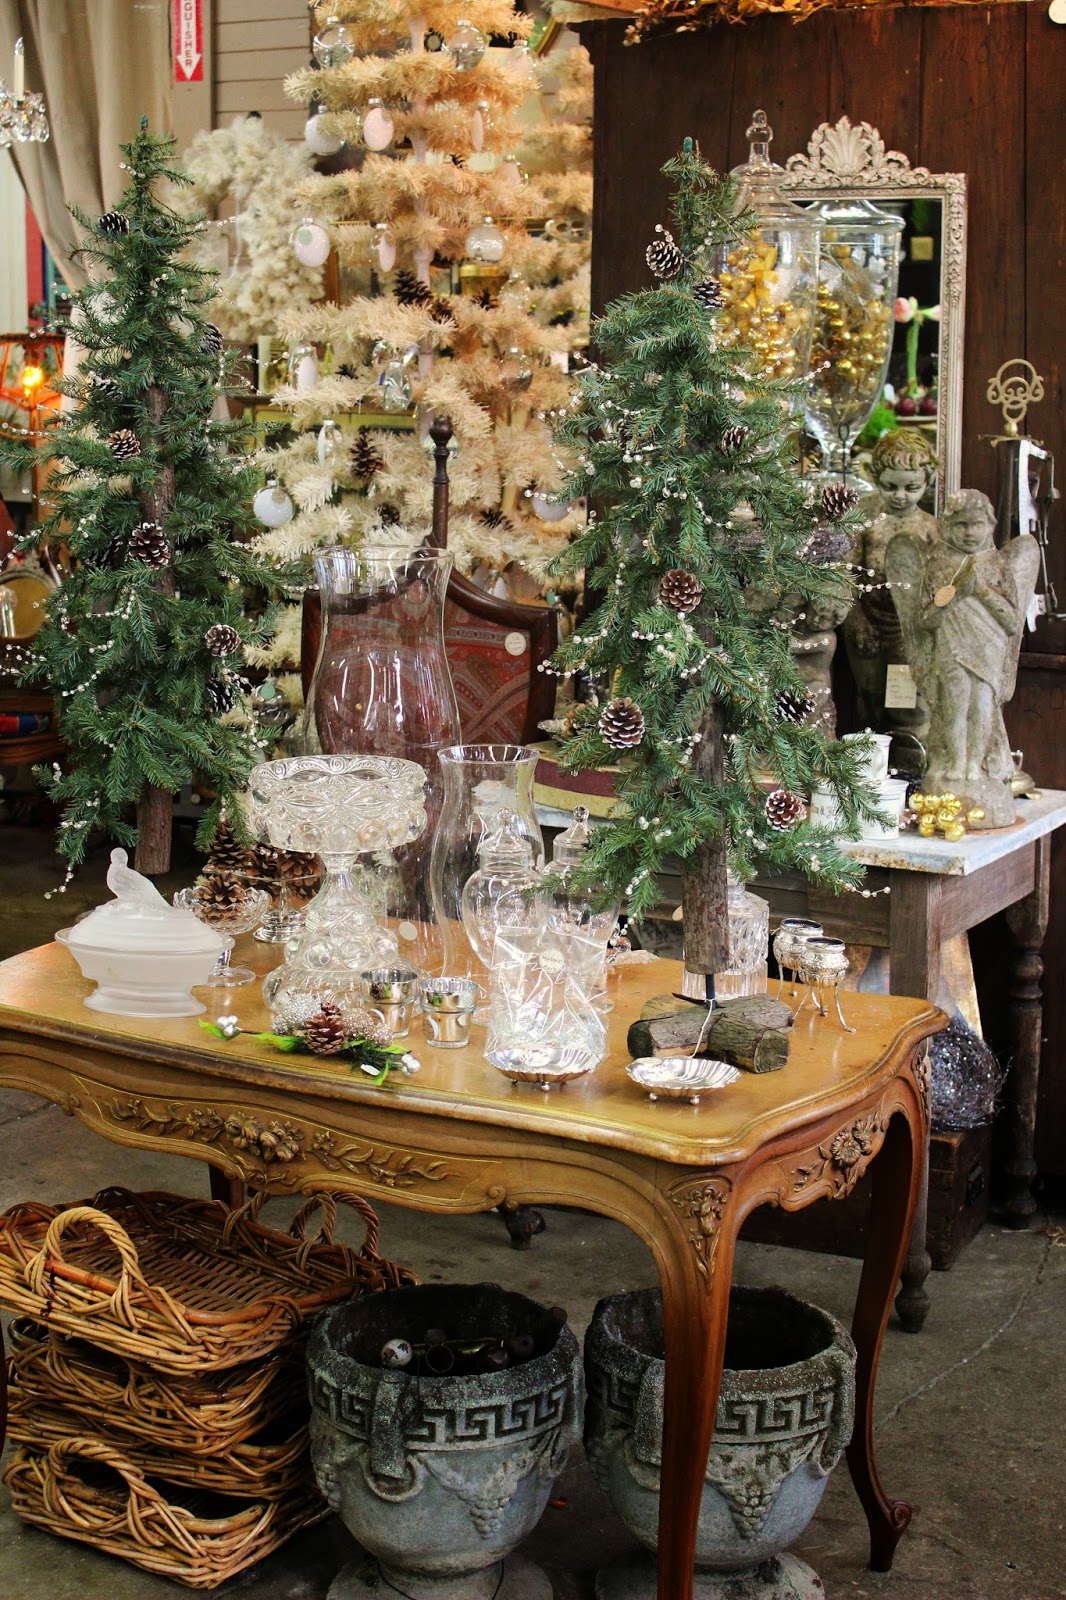 Monticello Antique Marketplace: Holiday ideas, Inspiration and so Much ...